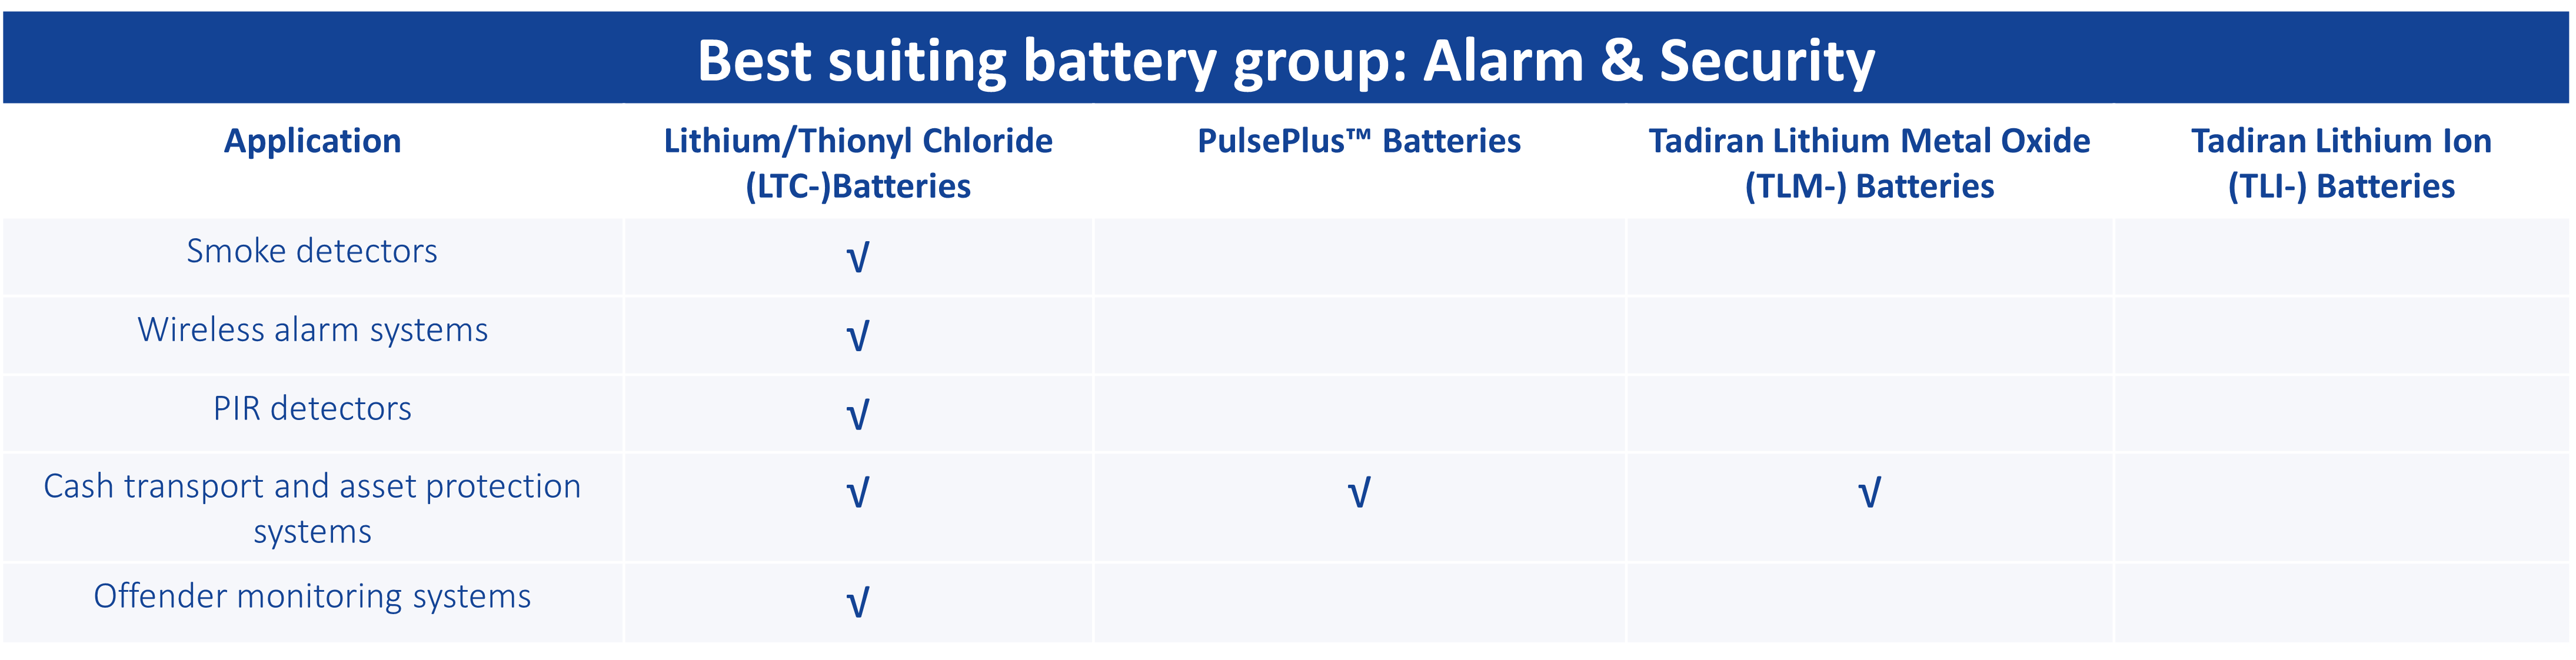 Batteries for Alarm & Security applications